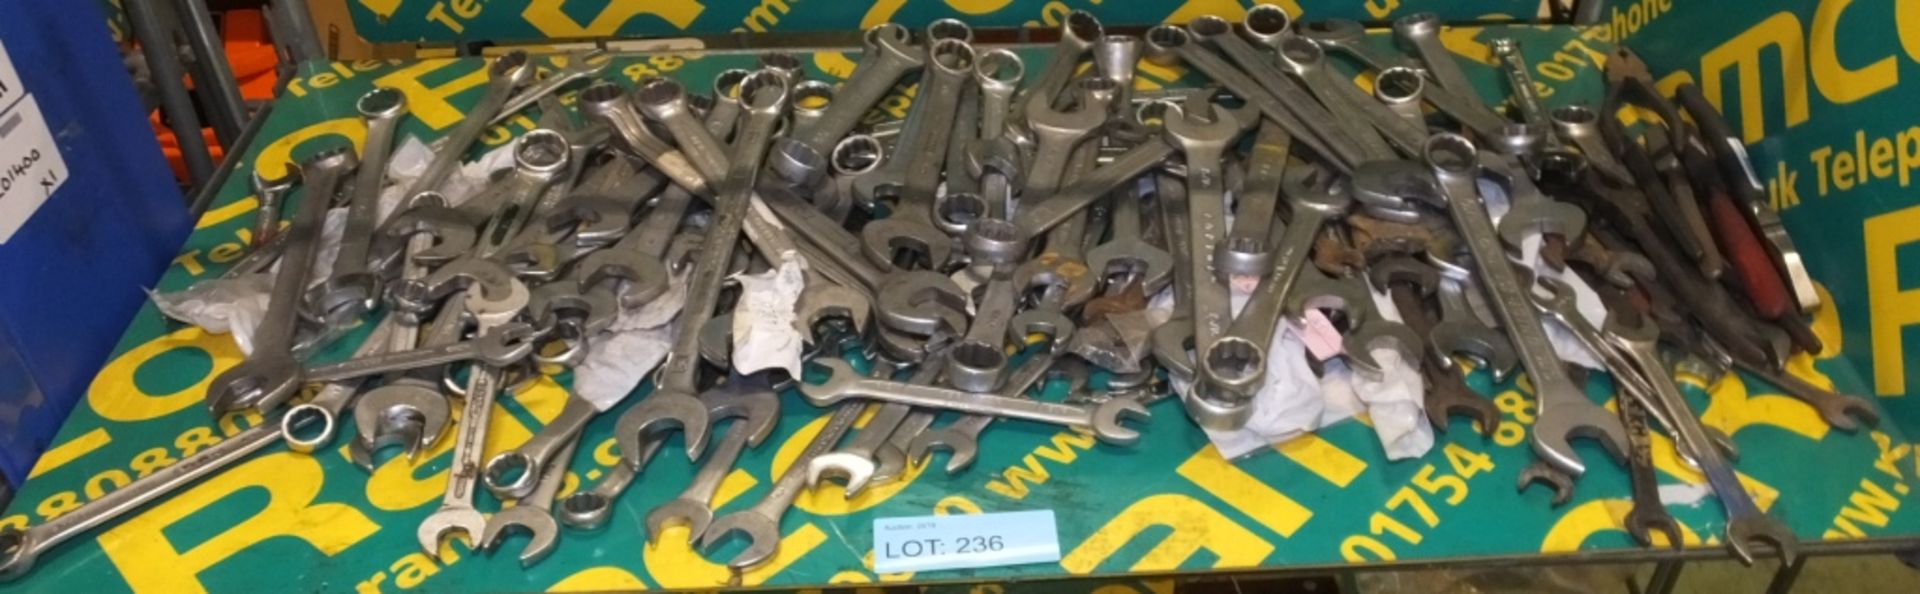 Various spanners, Pliers